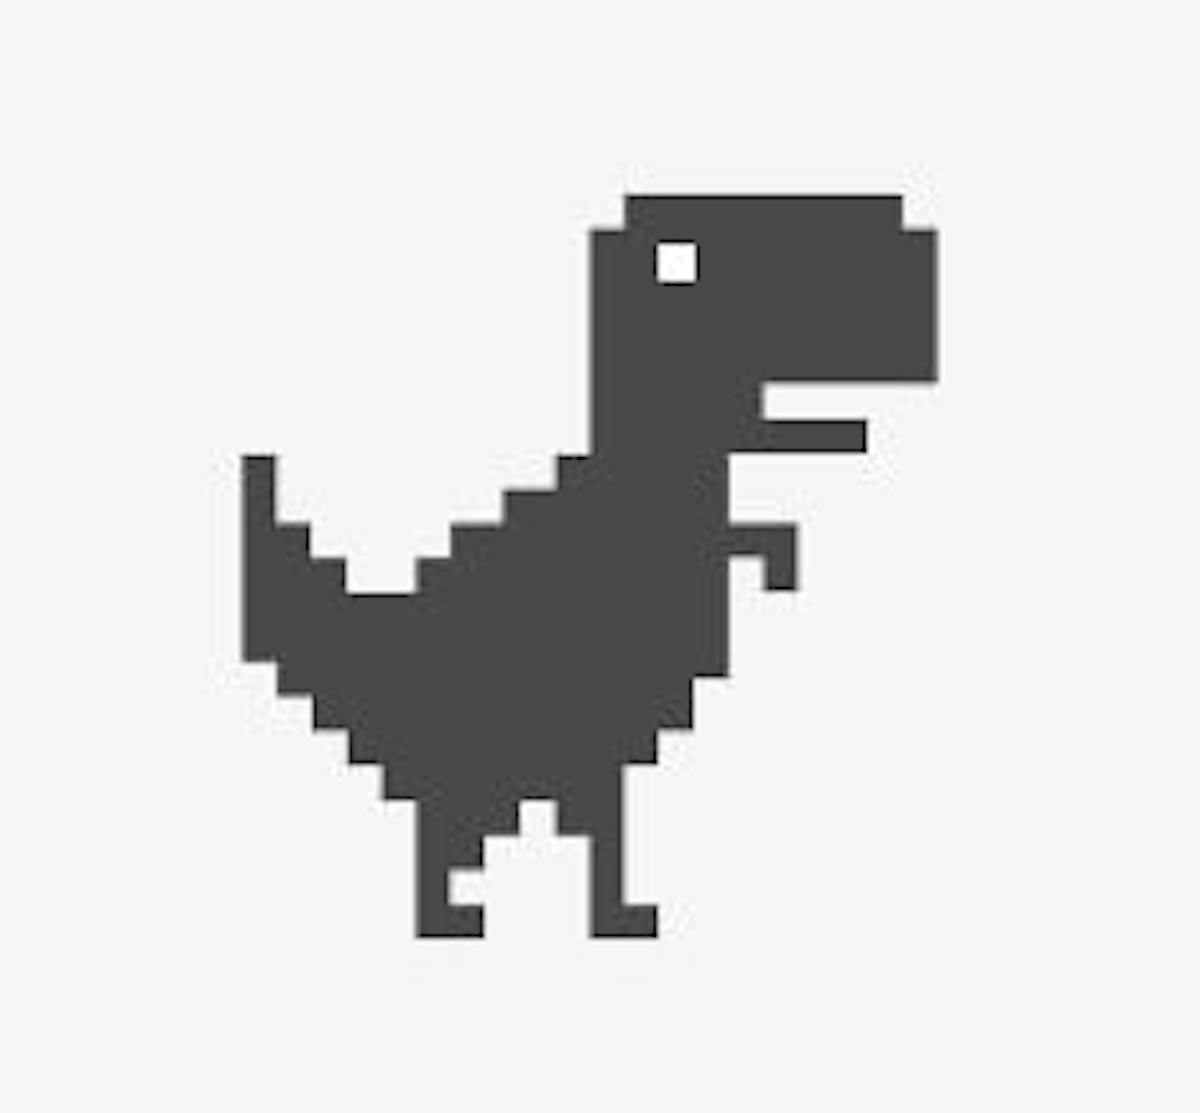 Hack the dino game